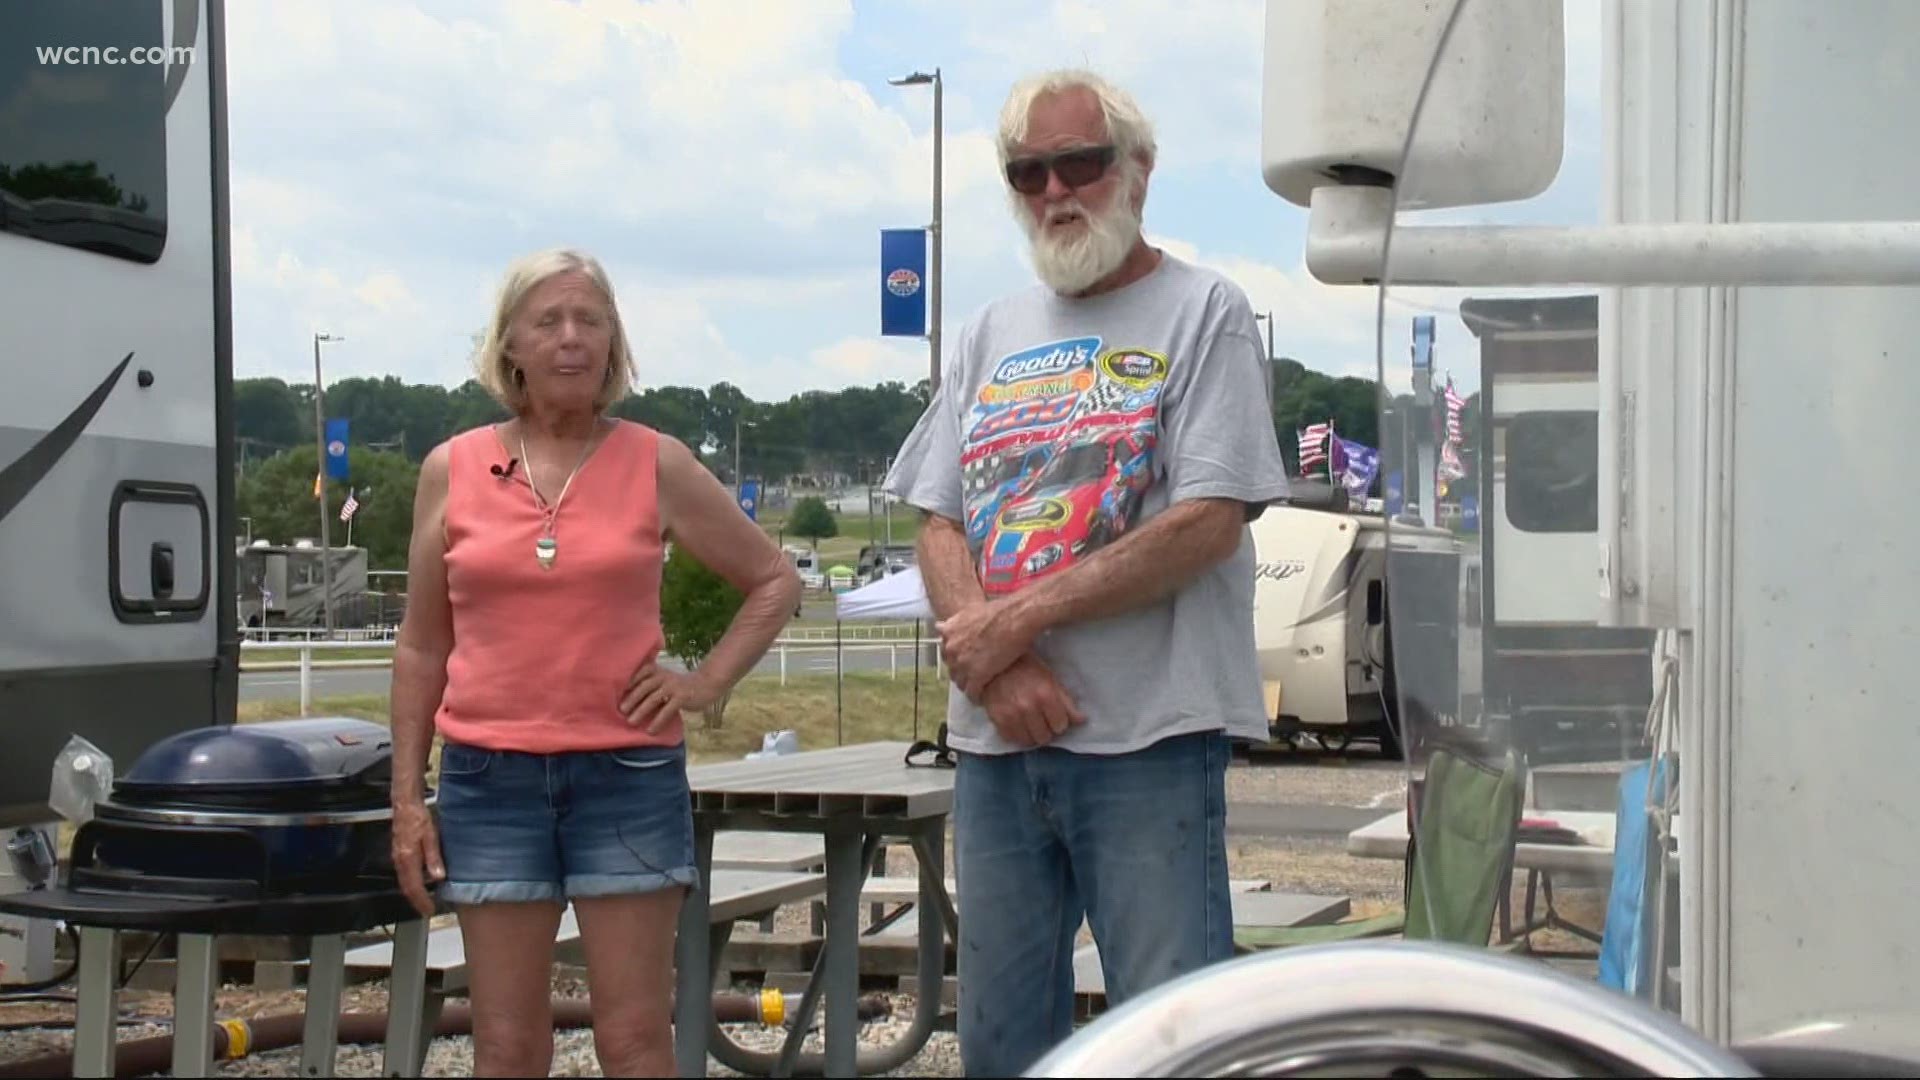 Sandy and Diane MacLaren are on a mission to attend every NASCAR race in the U.S. this year